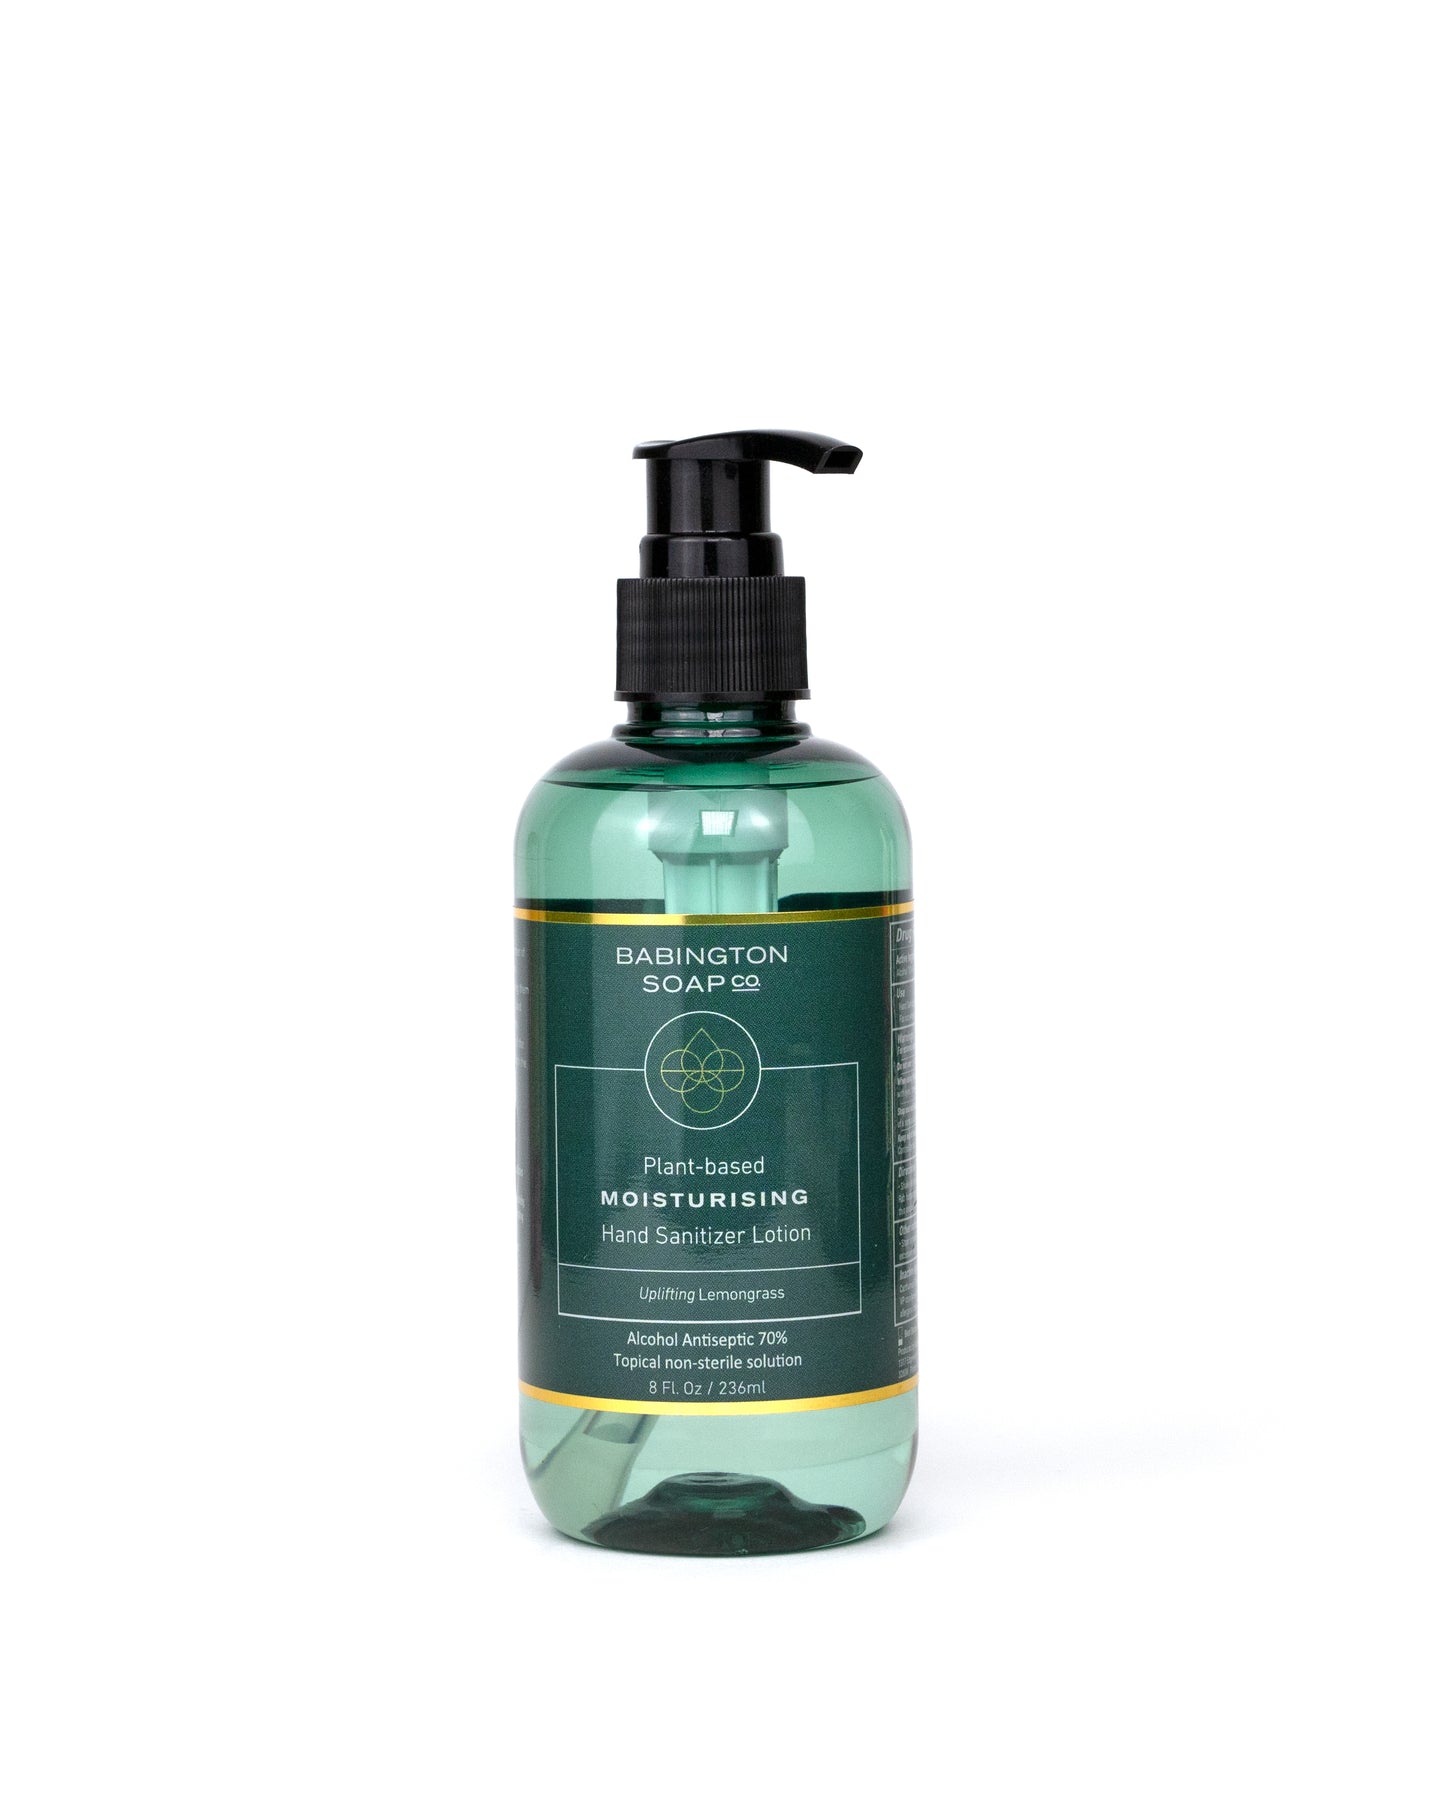 2-in-1 plant-based Moisturizer LOTION with an antibacterial - Uplifting Lemongrass